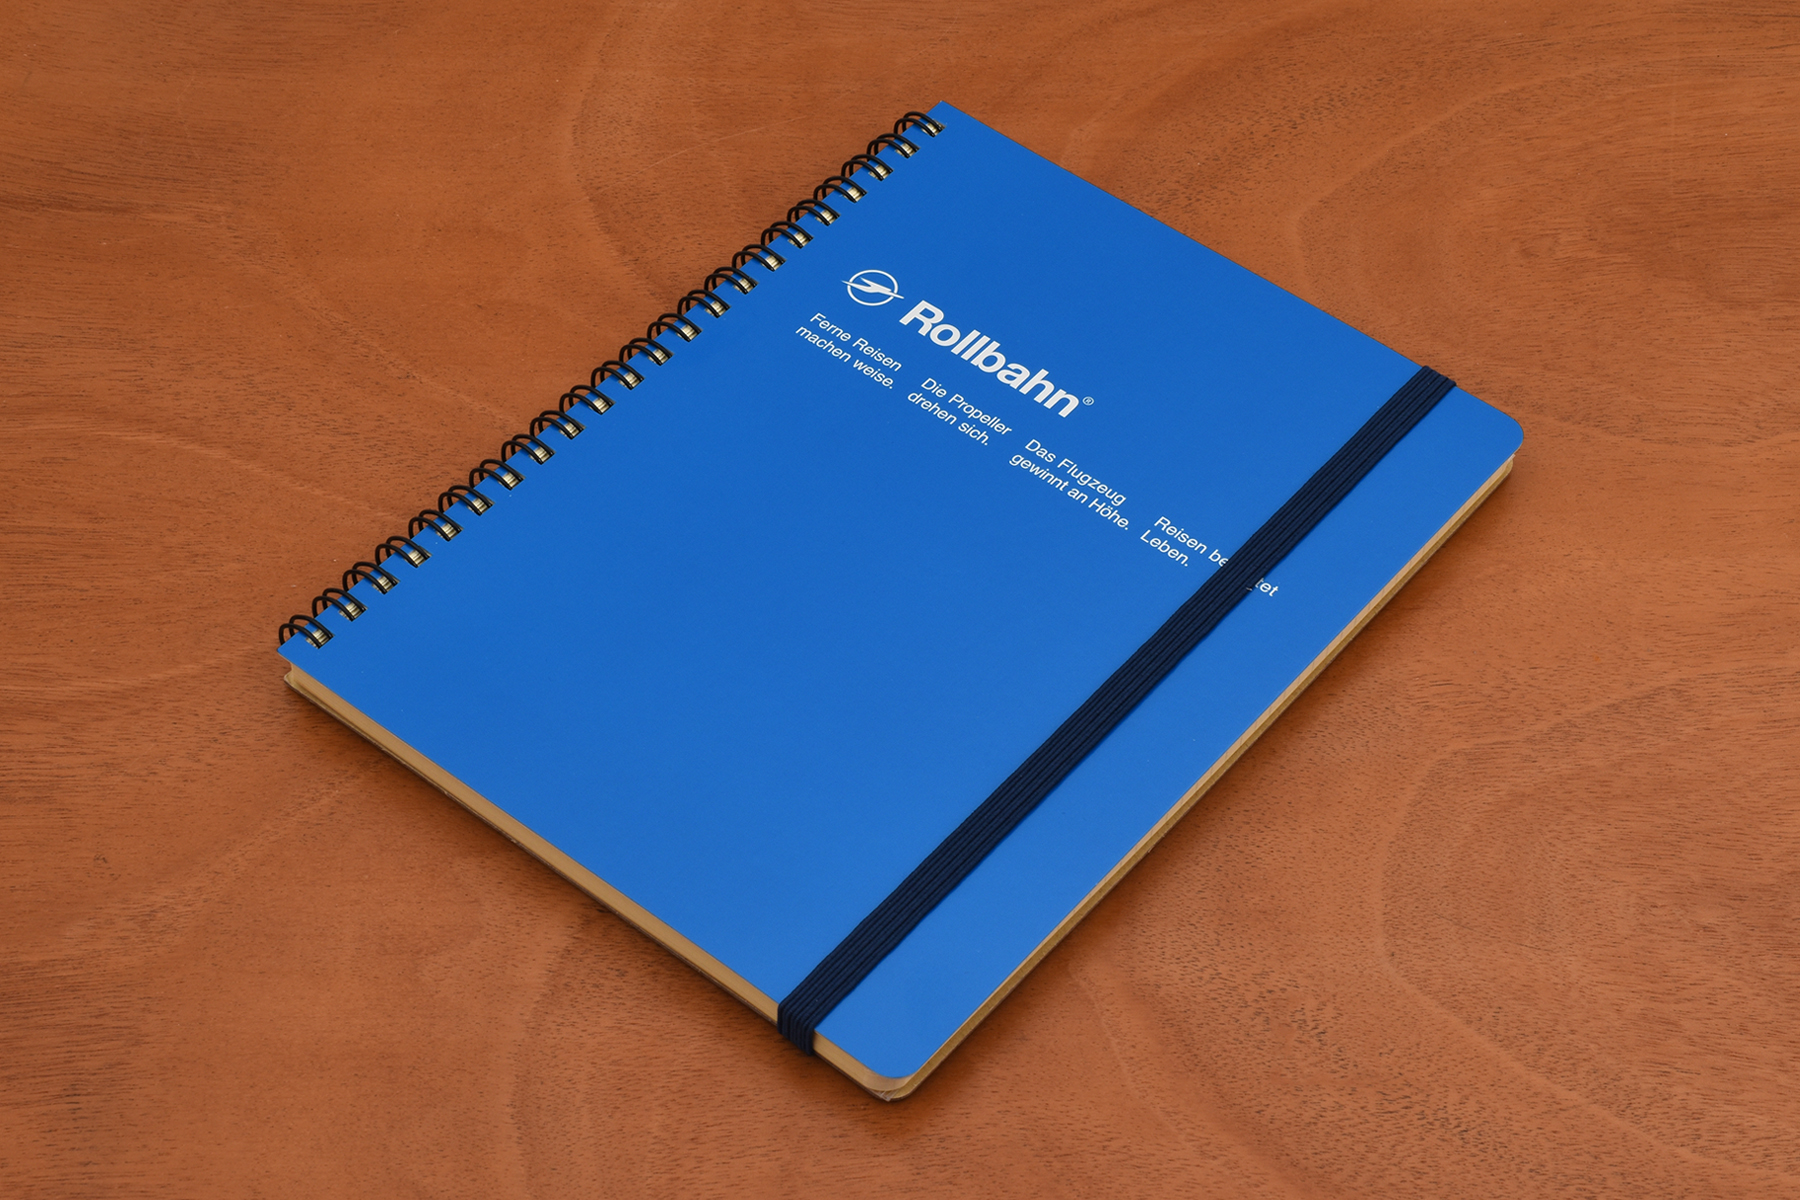 The undated Delfonics Rollbahn Spiral Notebook offers plenty of space for journaling.